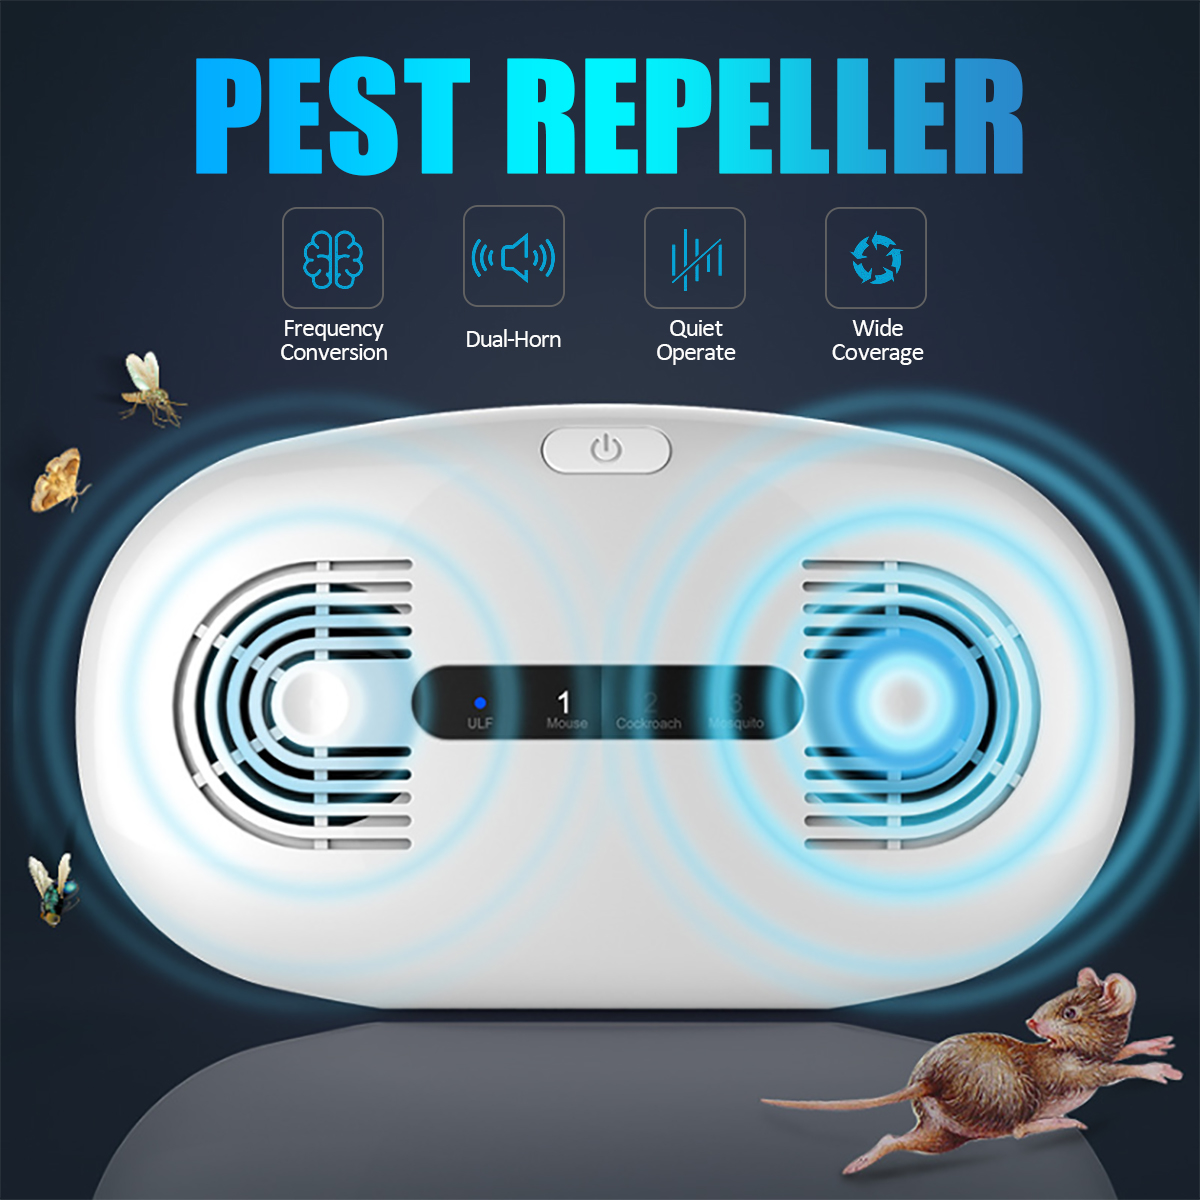 220V-Ultrasonic-Pest-Dispeller-Repeller-Control-Electronic-Fly-Rat-Mosquito-Rodent-Insect-Bug-Killer-1521853-1